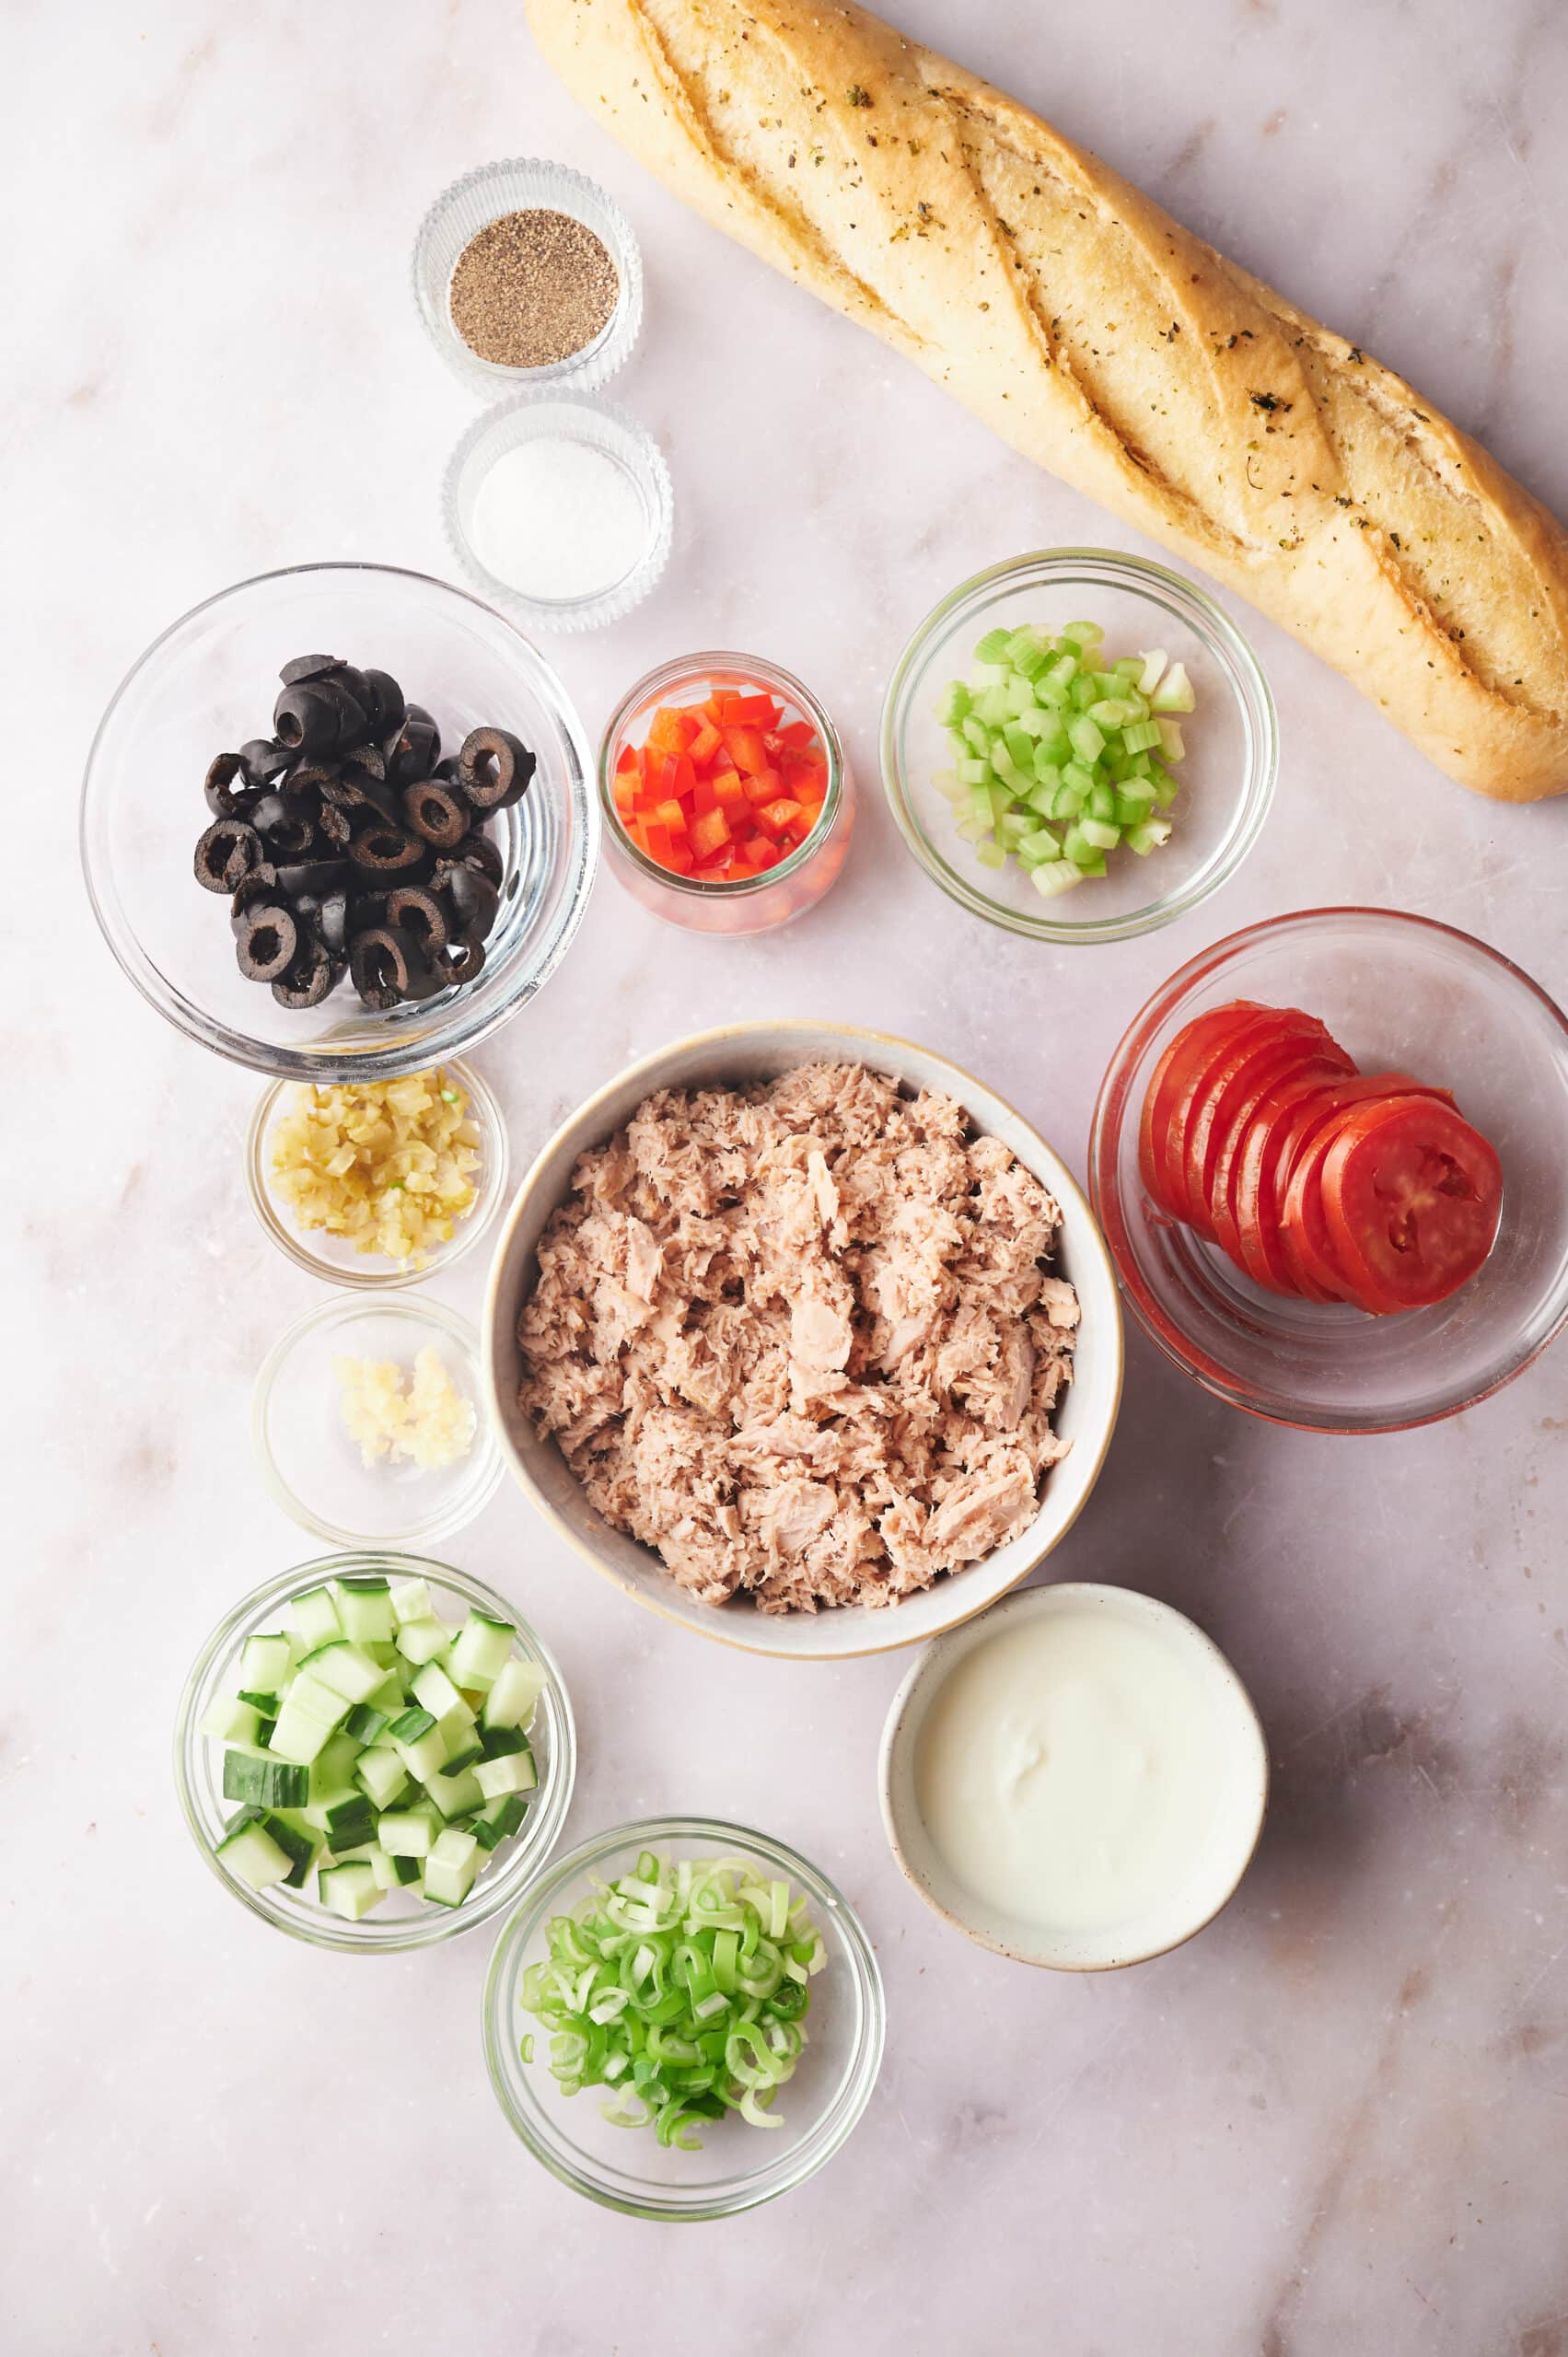 a baguette, celery, red bell pepper, sliced tomatoes, tuna, mayonnaise, black olives, and cucumber in separate bowls on a gray counter.